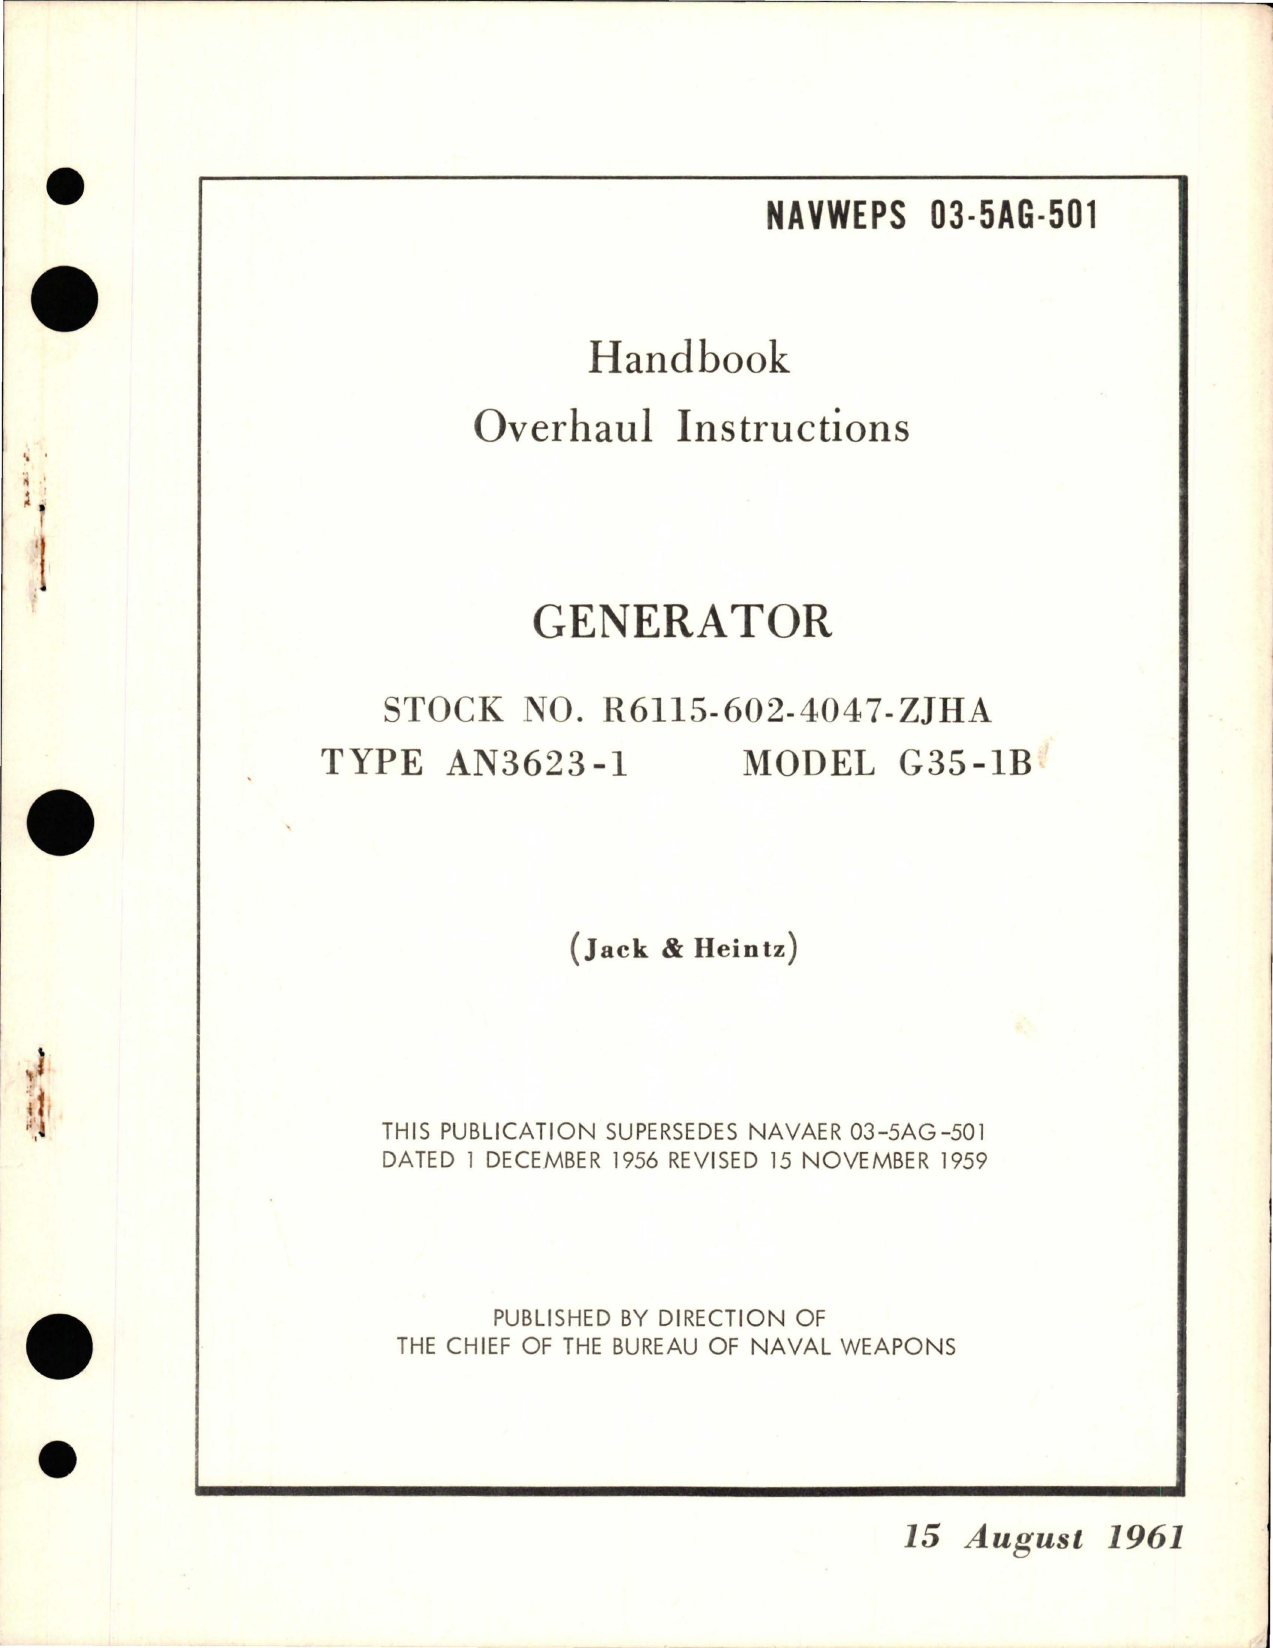 Sample page 1 from AirCorps Library document: Overhaul Instructions for Generator - Type AN 3623-1 - Model G35-1B